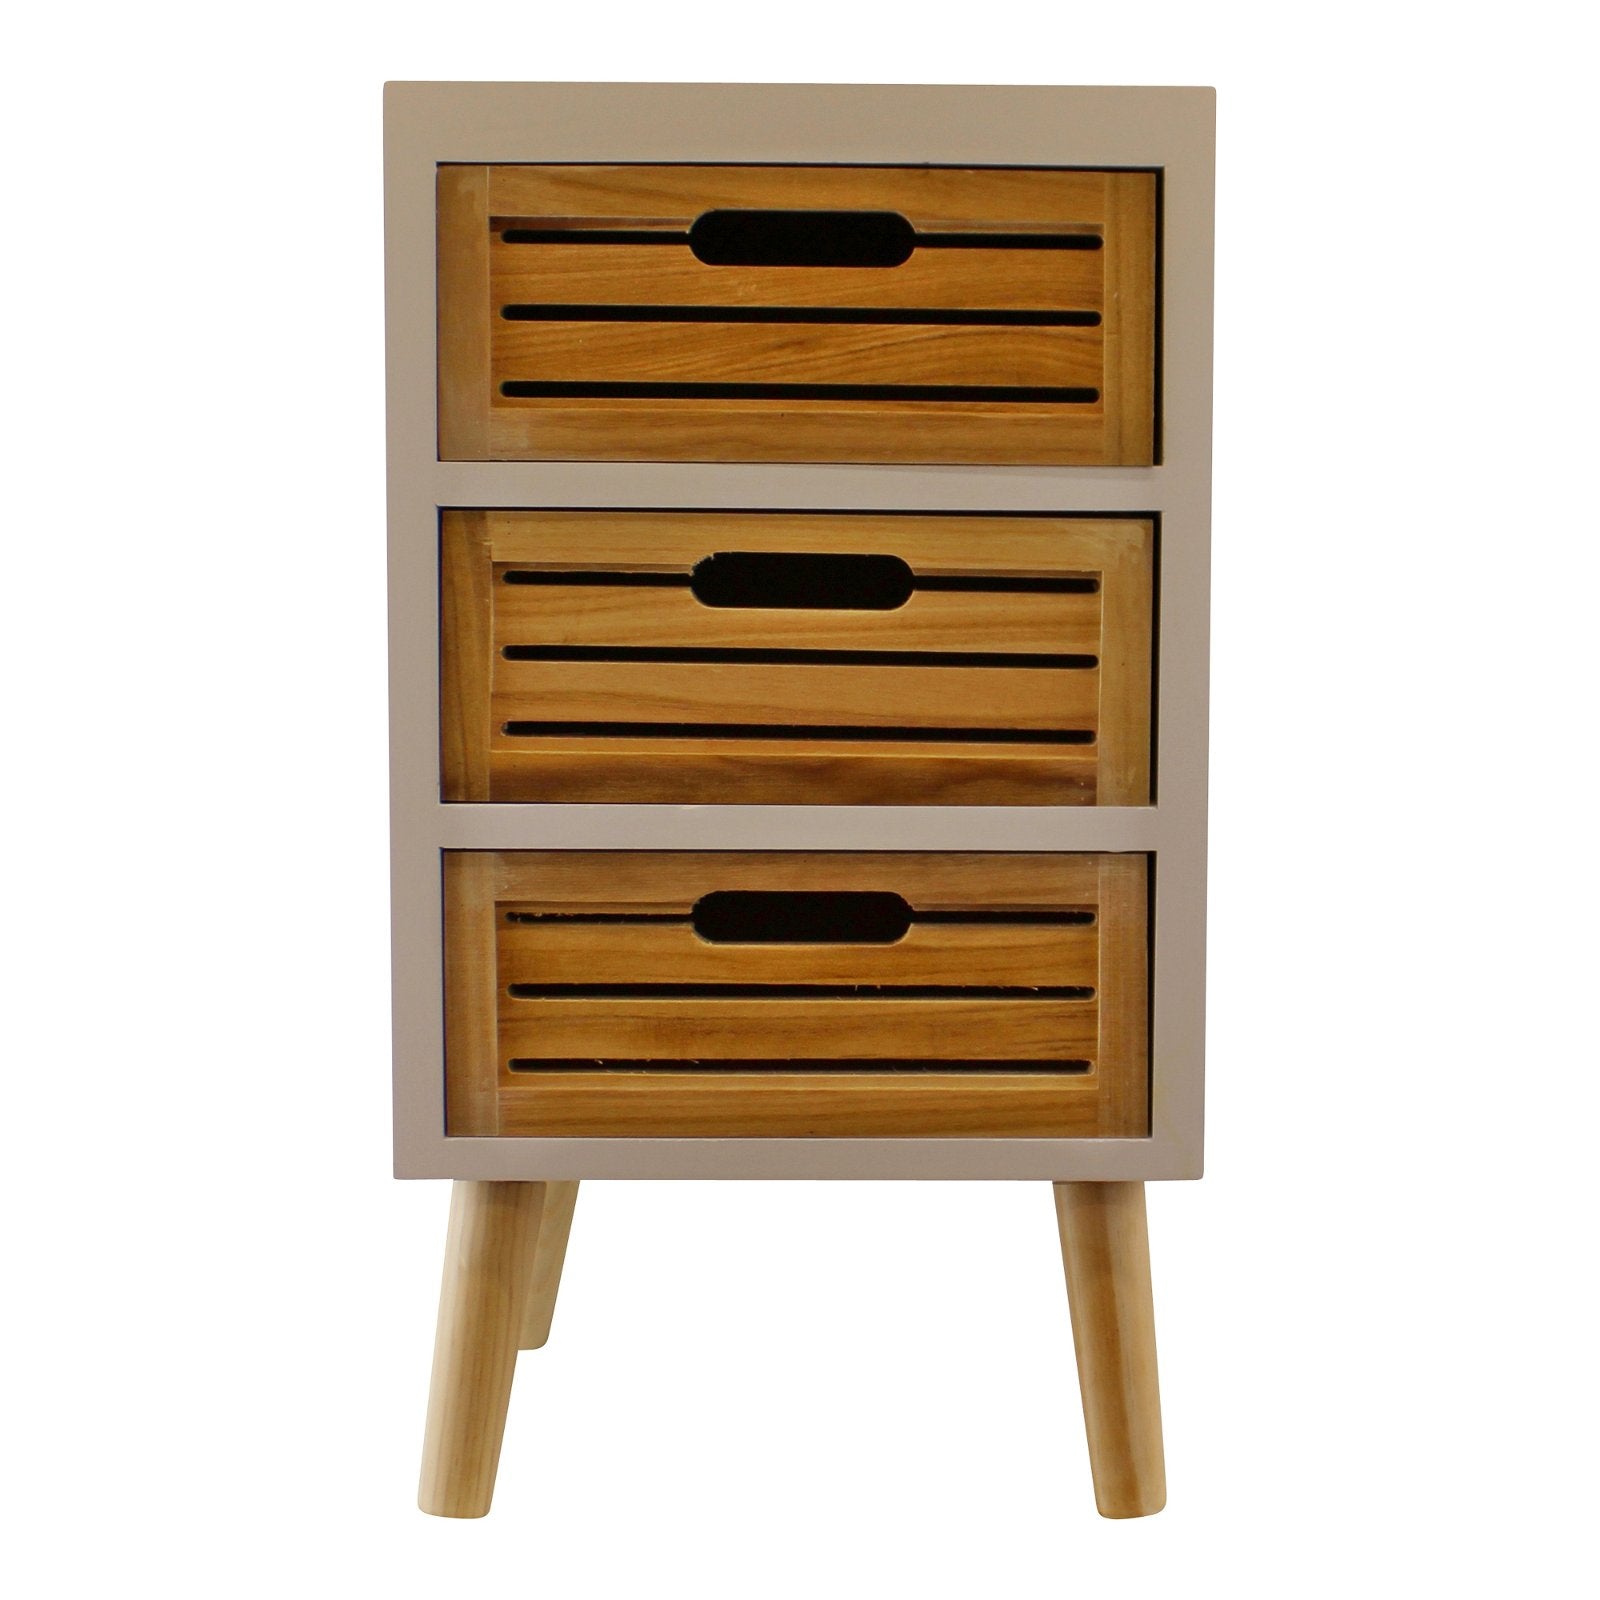 View 3 Drawer Unit In White With Natural Wooden Drawers With Removable Legs information